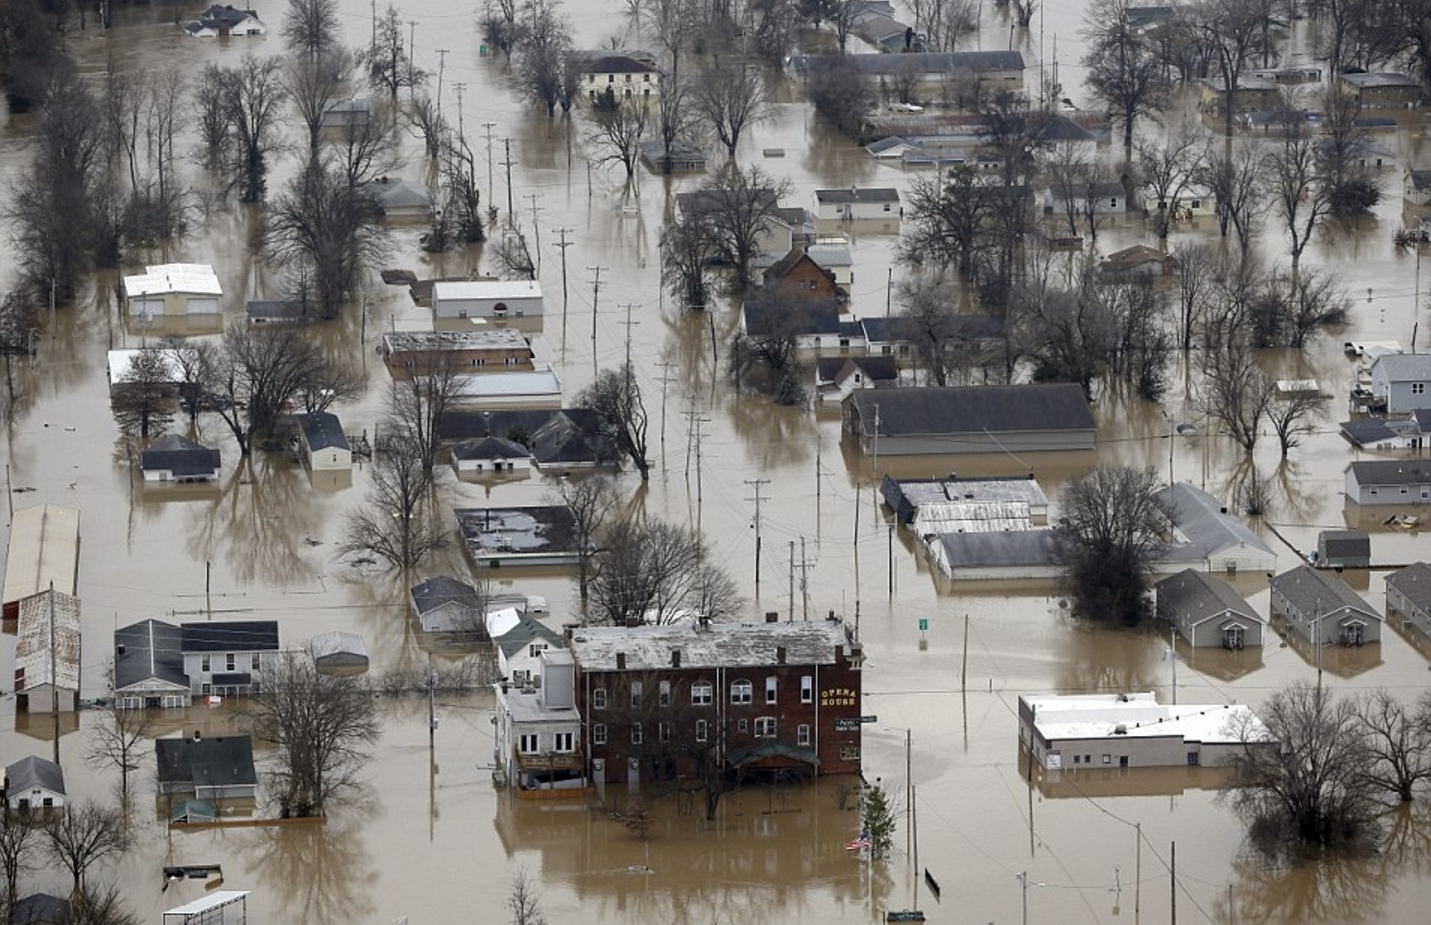 Ariel Photographs Show Devastation Caused By Flooding In Mississippi